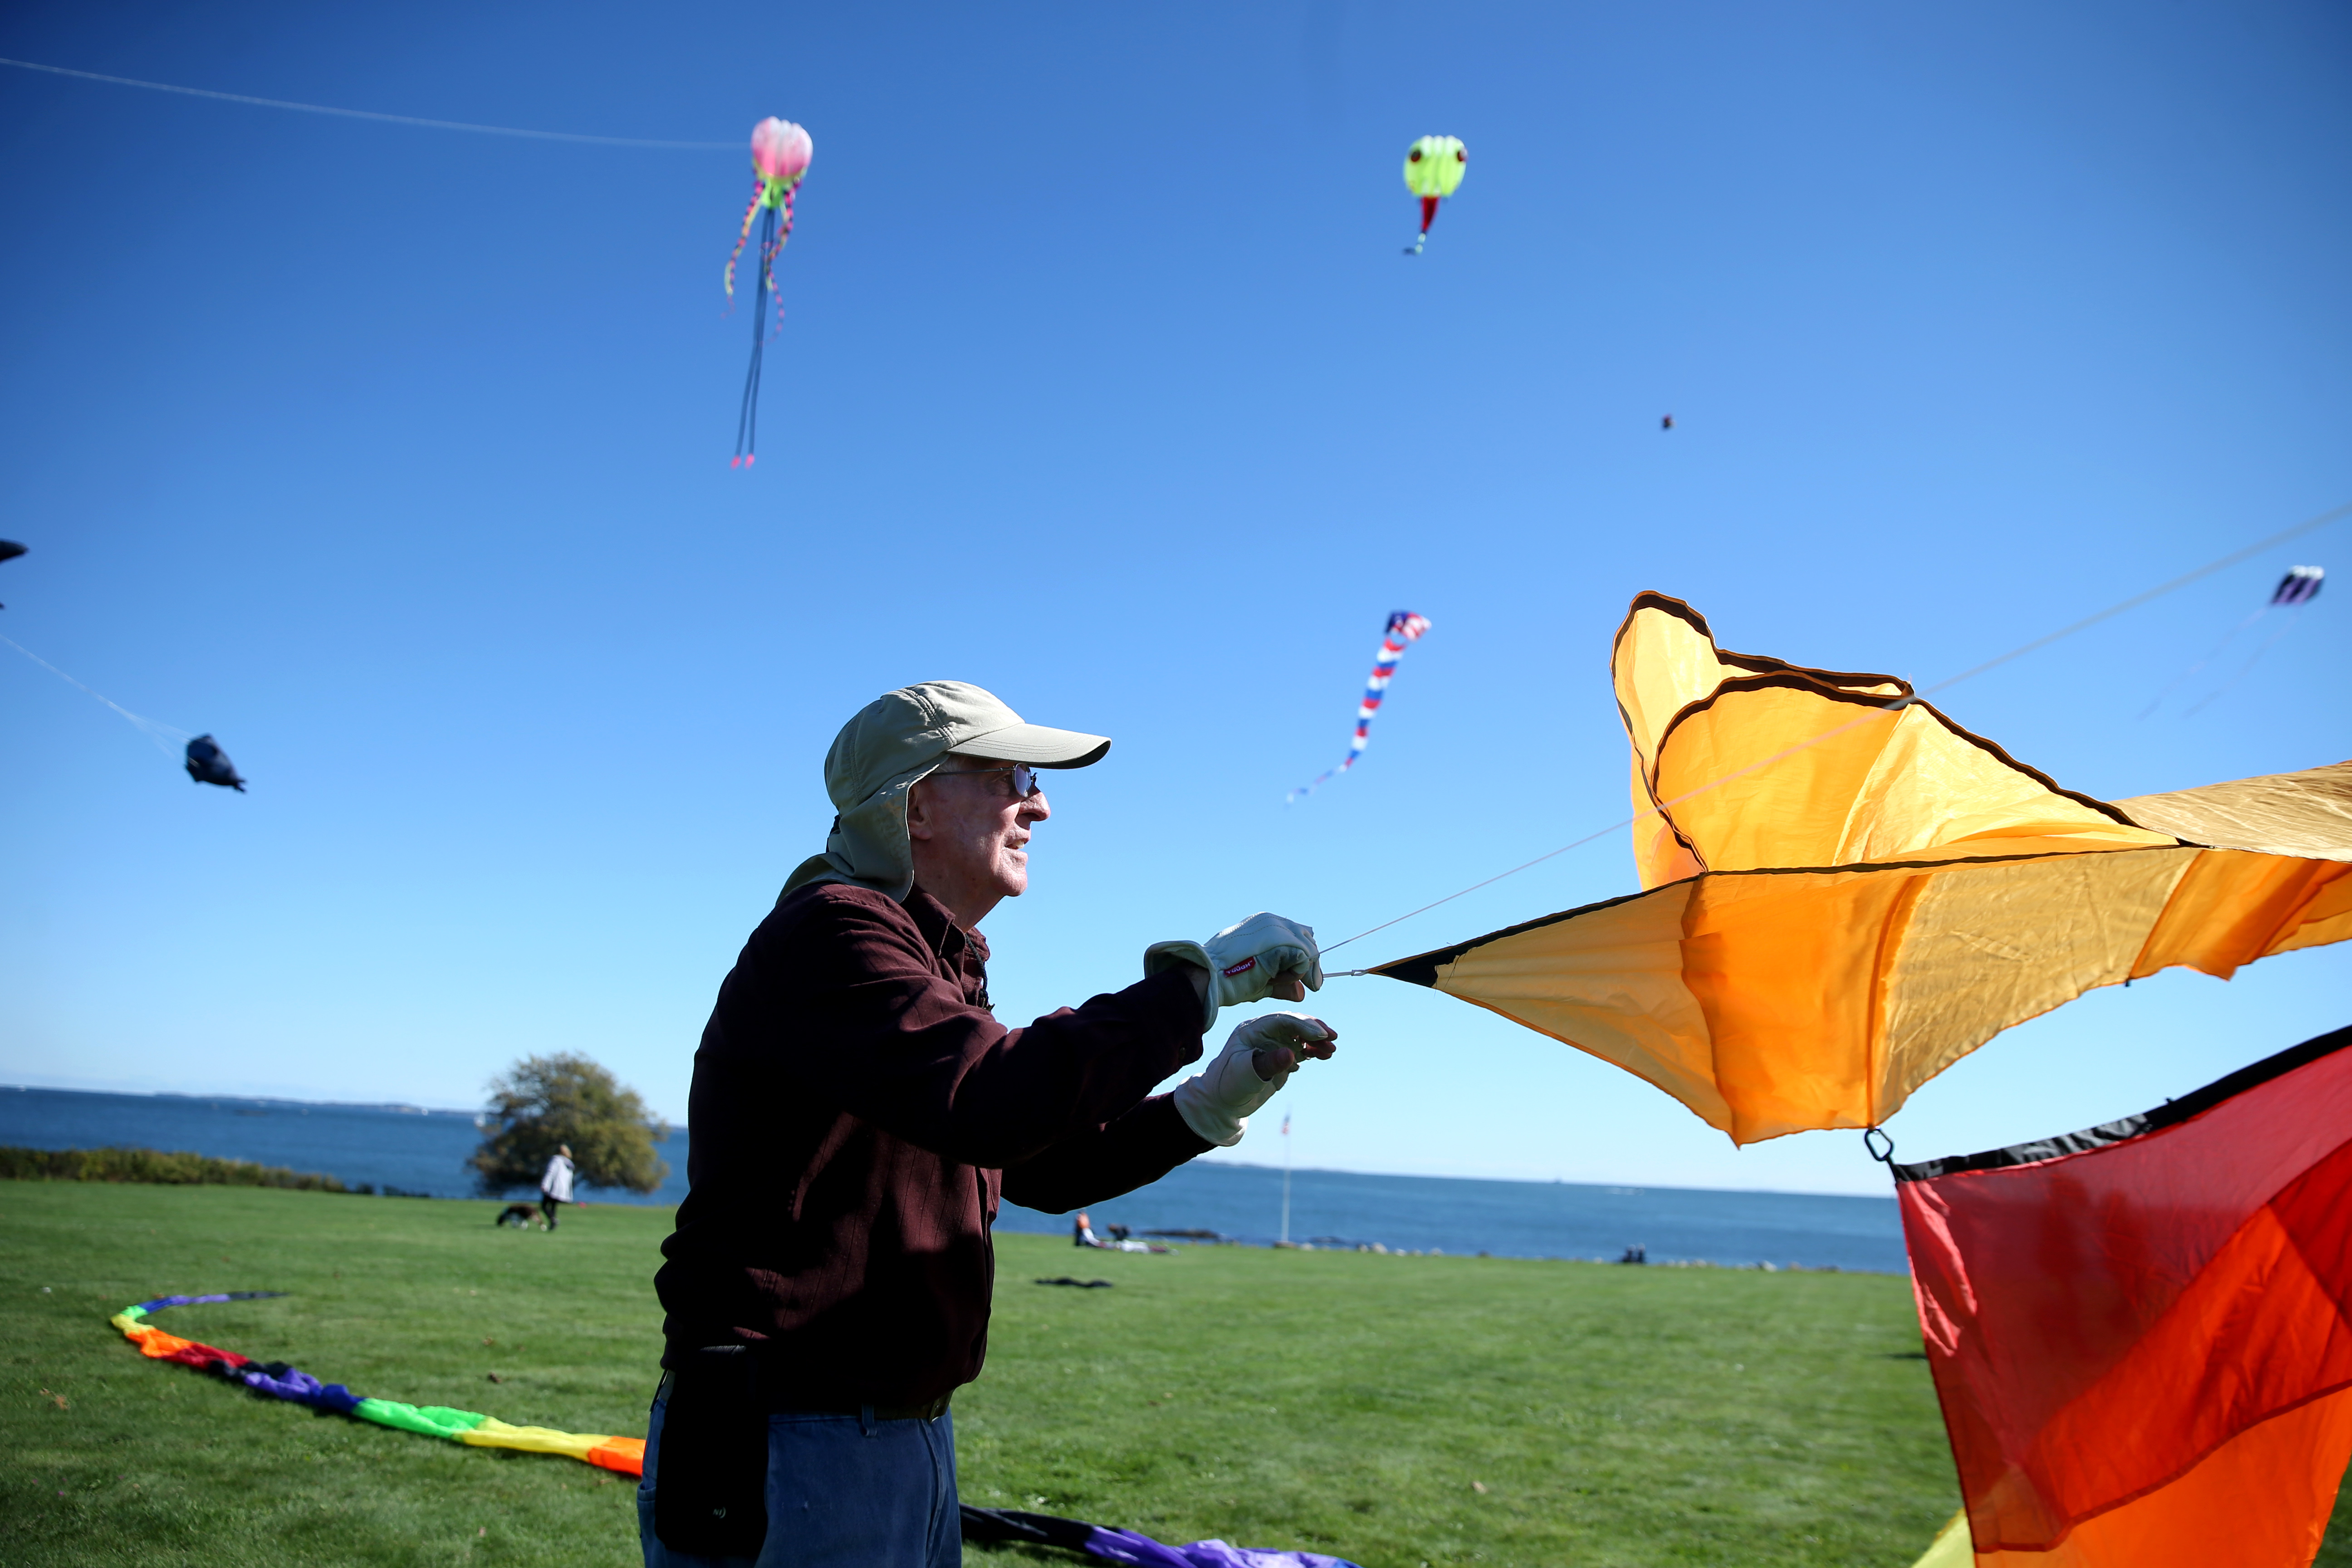 The 'kite man' still flies high into a cool and colorful sky - The Boston  Globe